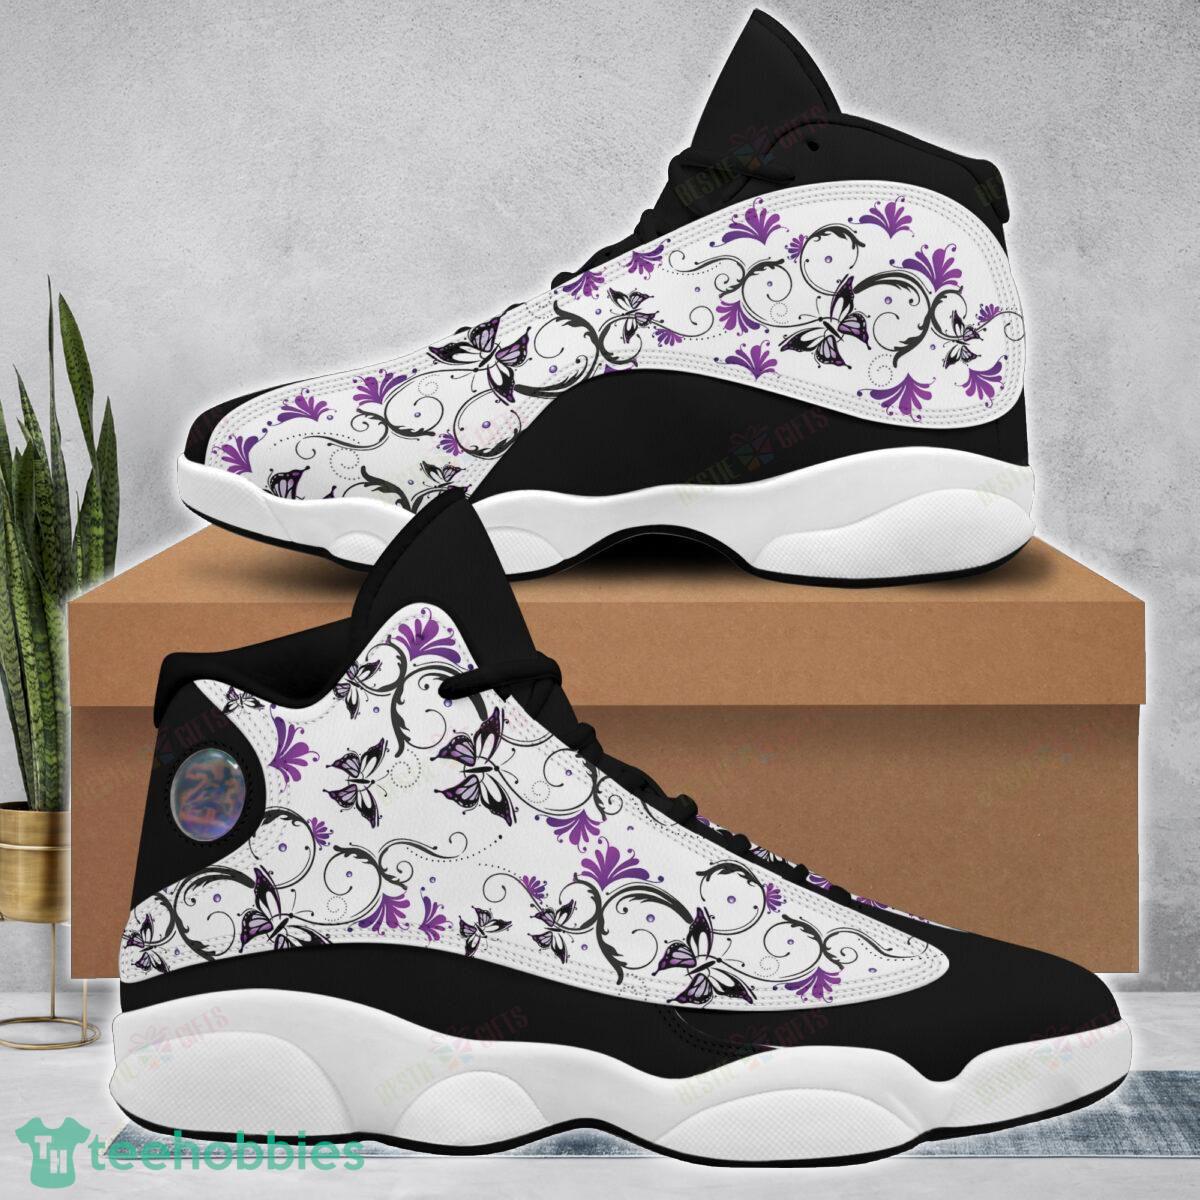 Butterfly And Flower Air Jordan 13 Running Shoes Gift For Men Women Product Photo 1